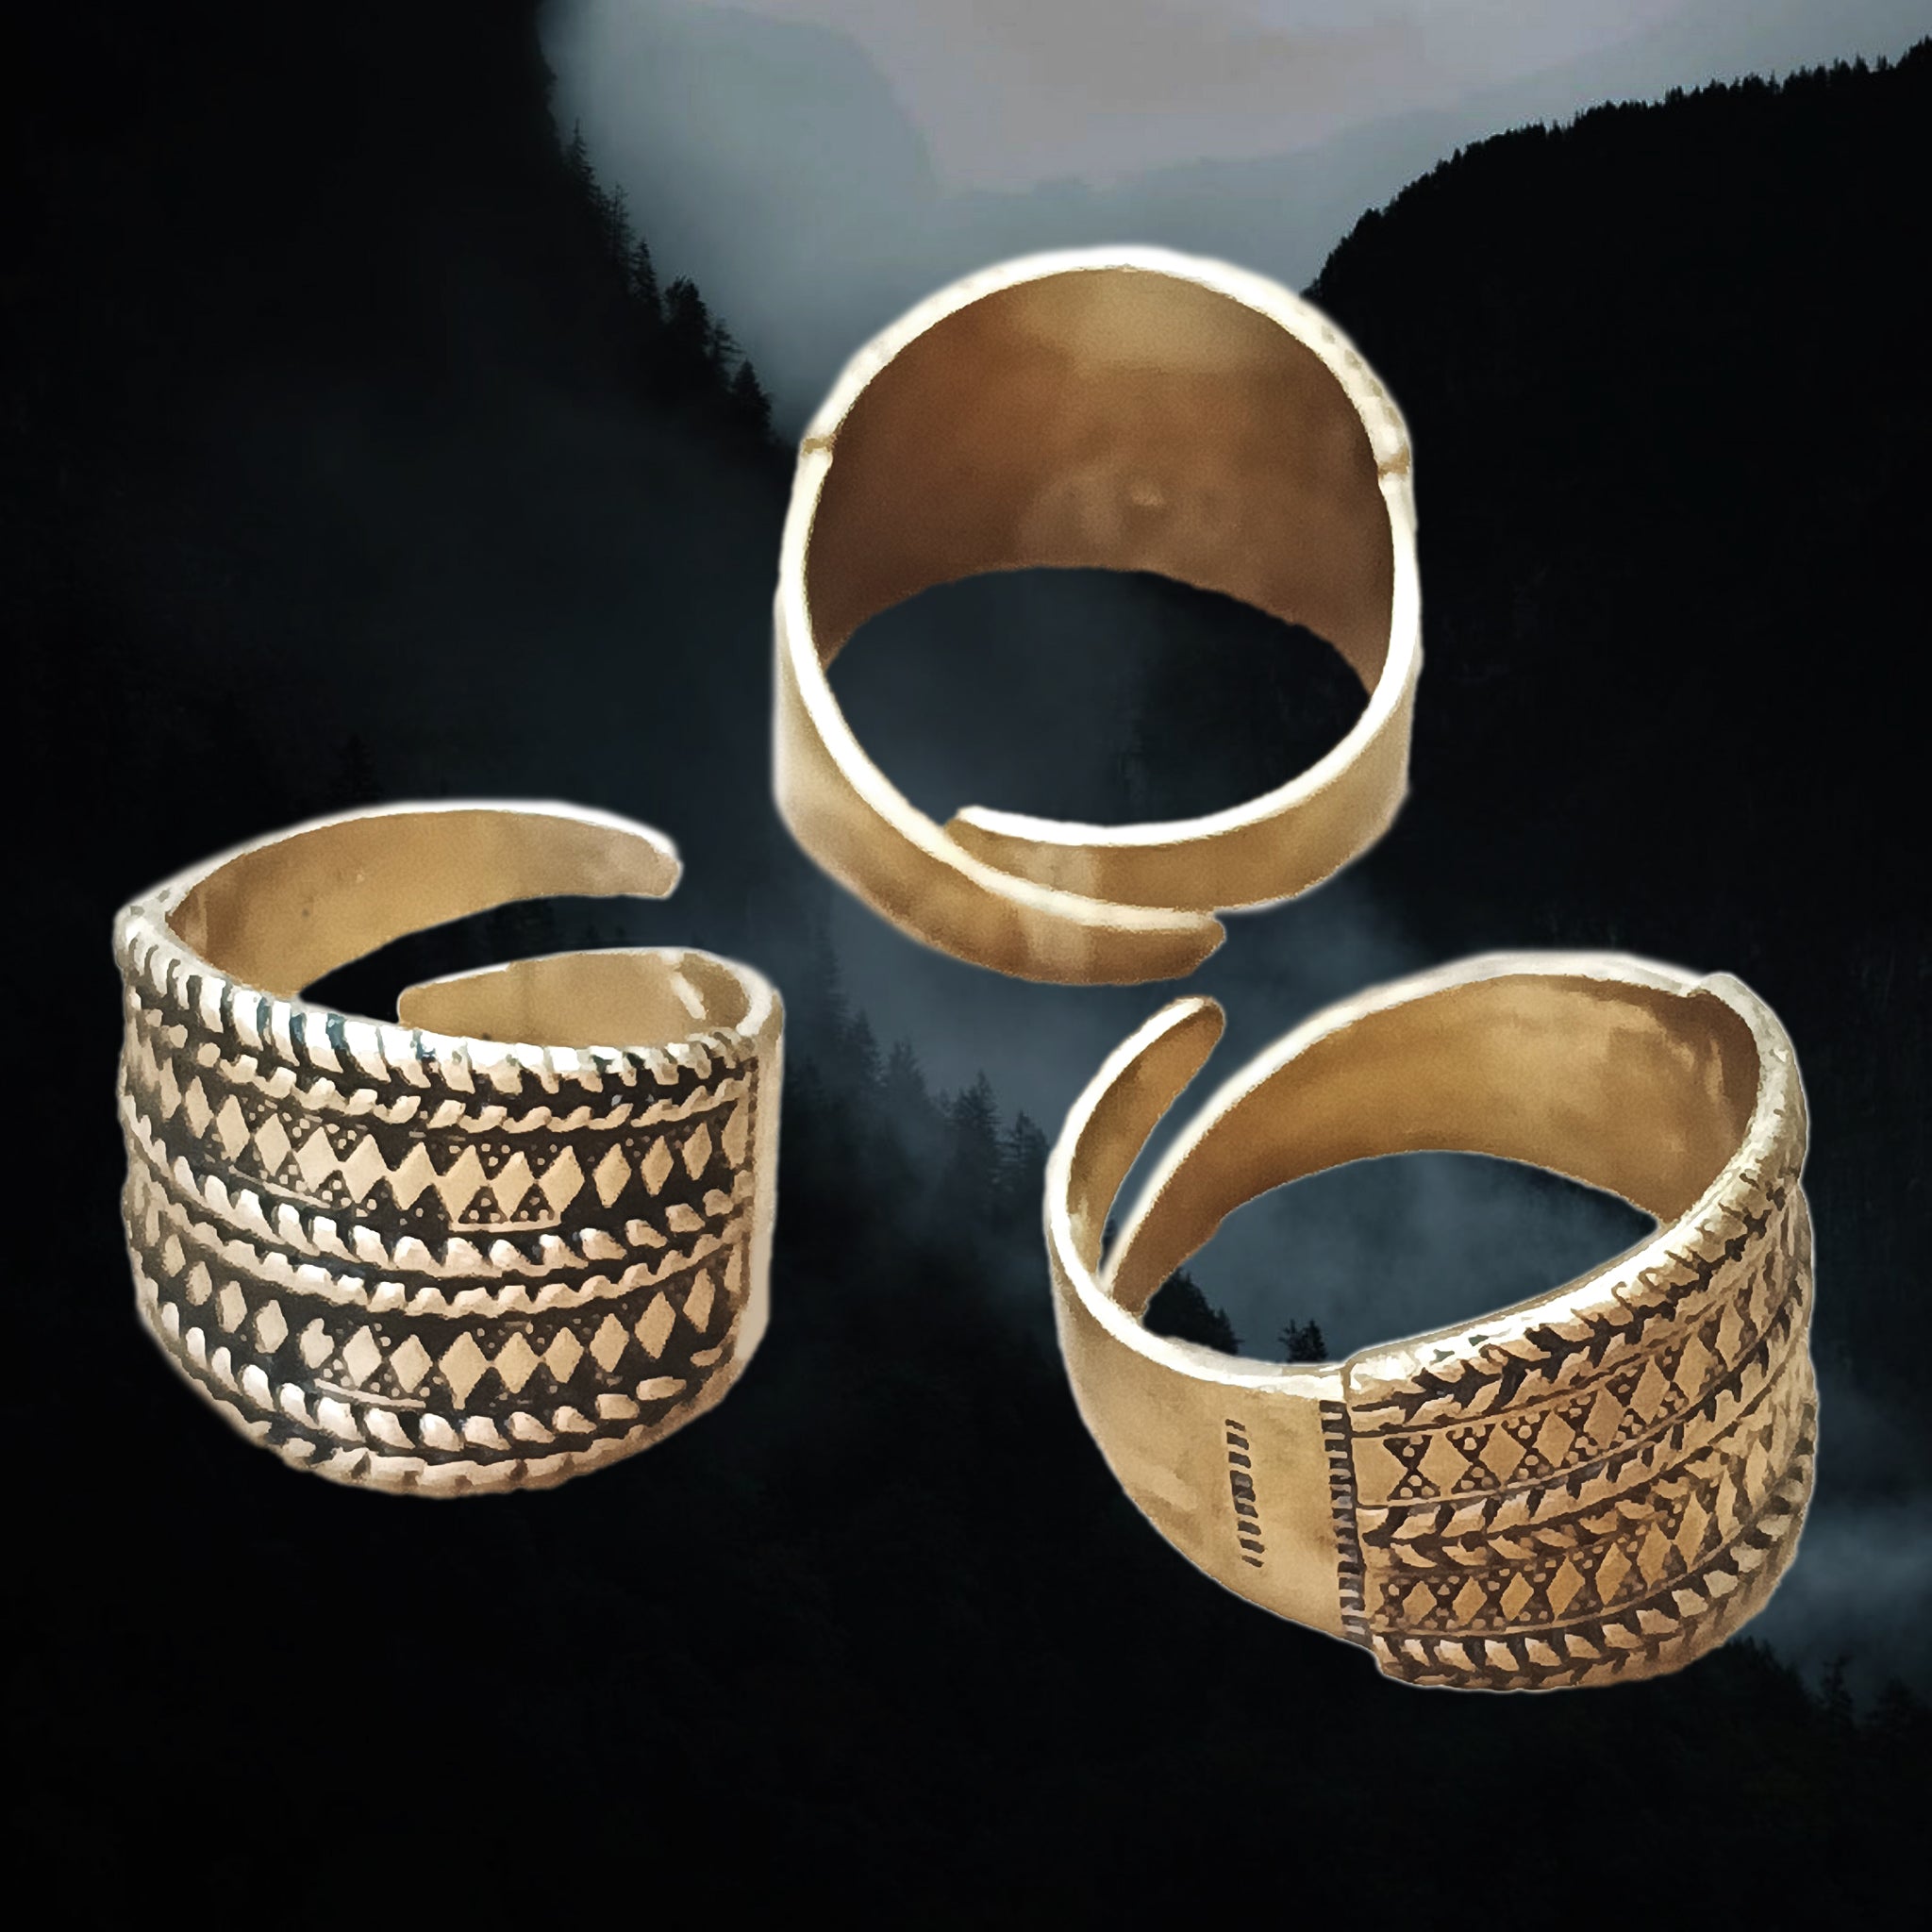 Bronze Replica Rings with Decorated Viking Design - Various Angles